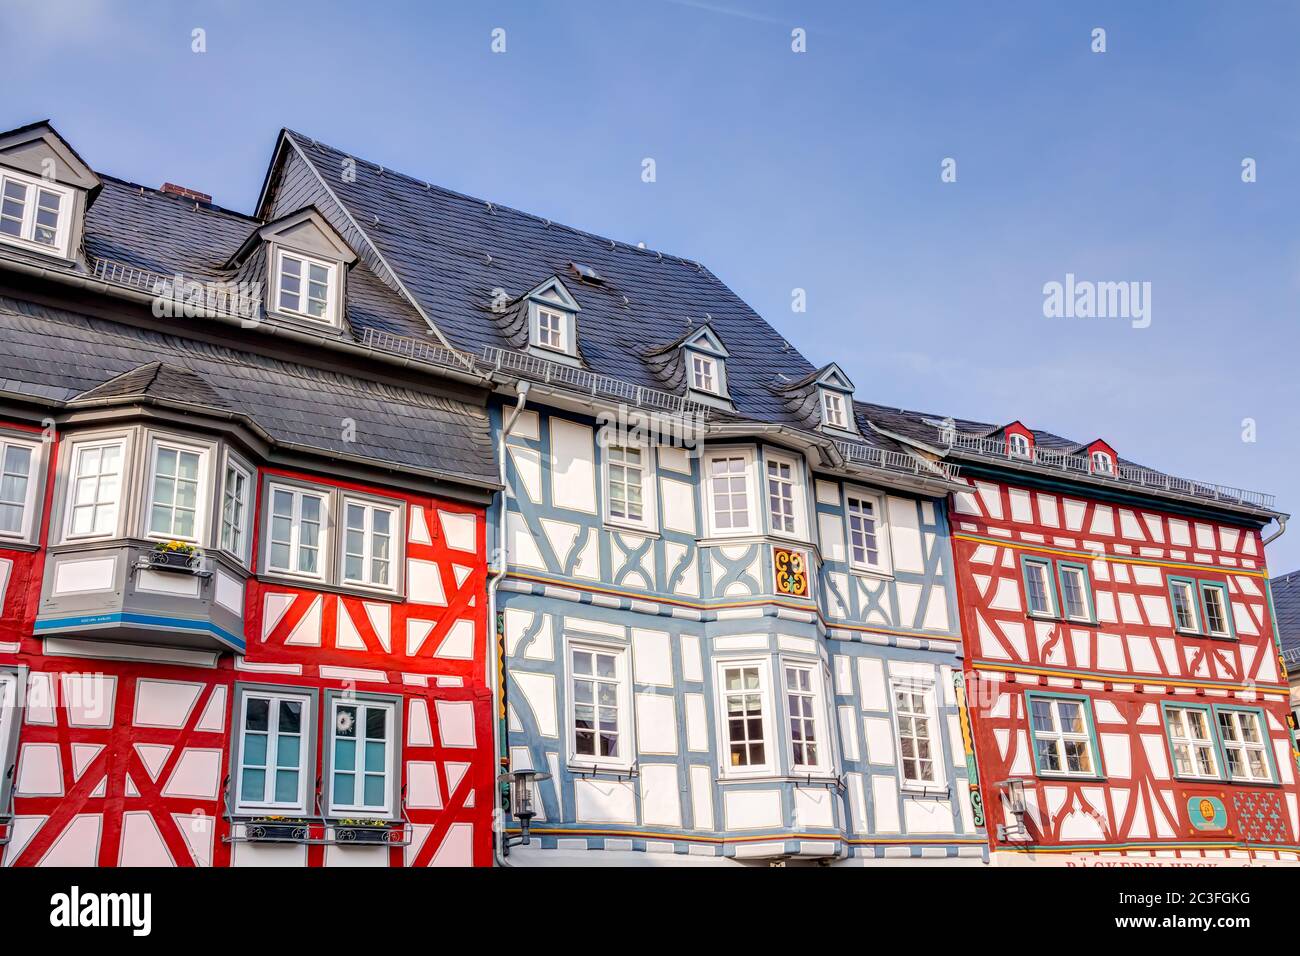 Half-timbered houses in the historic center of Bad Camberg in Hesse, Germany Stock Photo